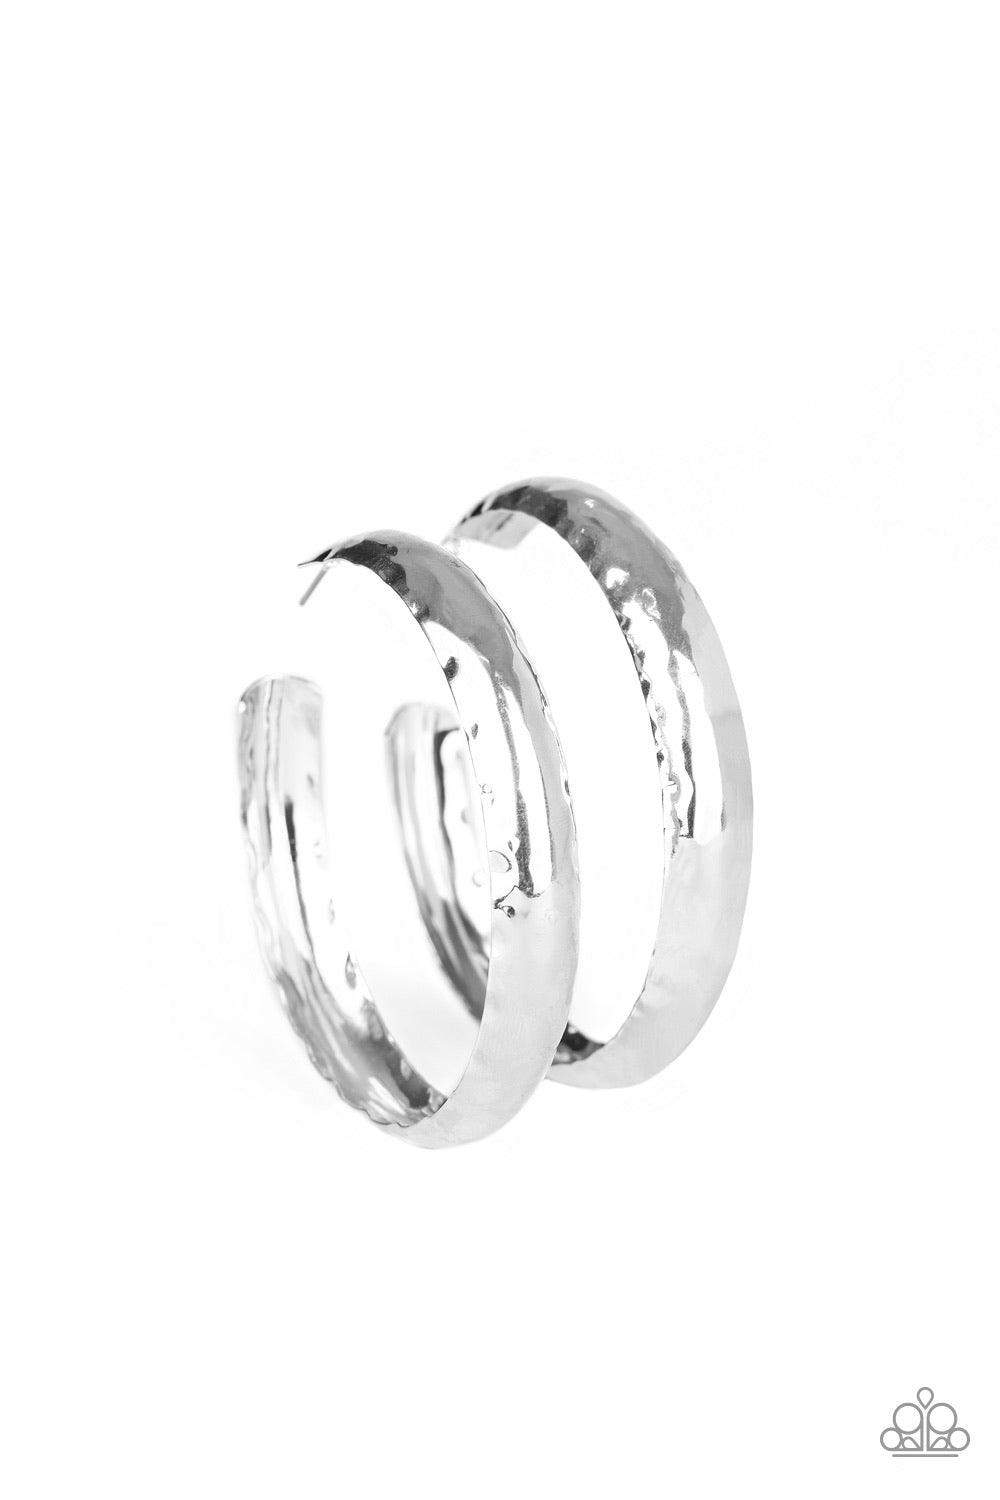 Paparazzi Accessories Check Out These Curves - Silver A thick piece of silver has been heavily hammered and delicately curved into a dramatically handcrafted hoop. Earring attaches to a standard post fitting. Hoop measures approximately 2 ½” in diameter J